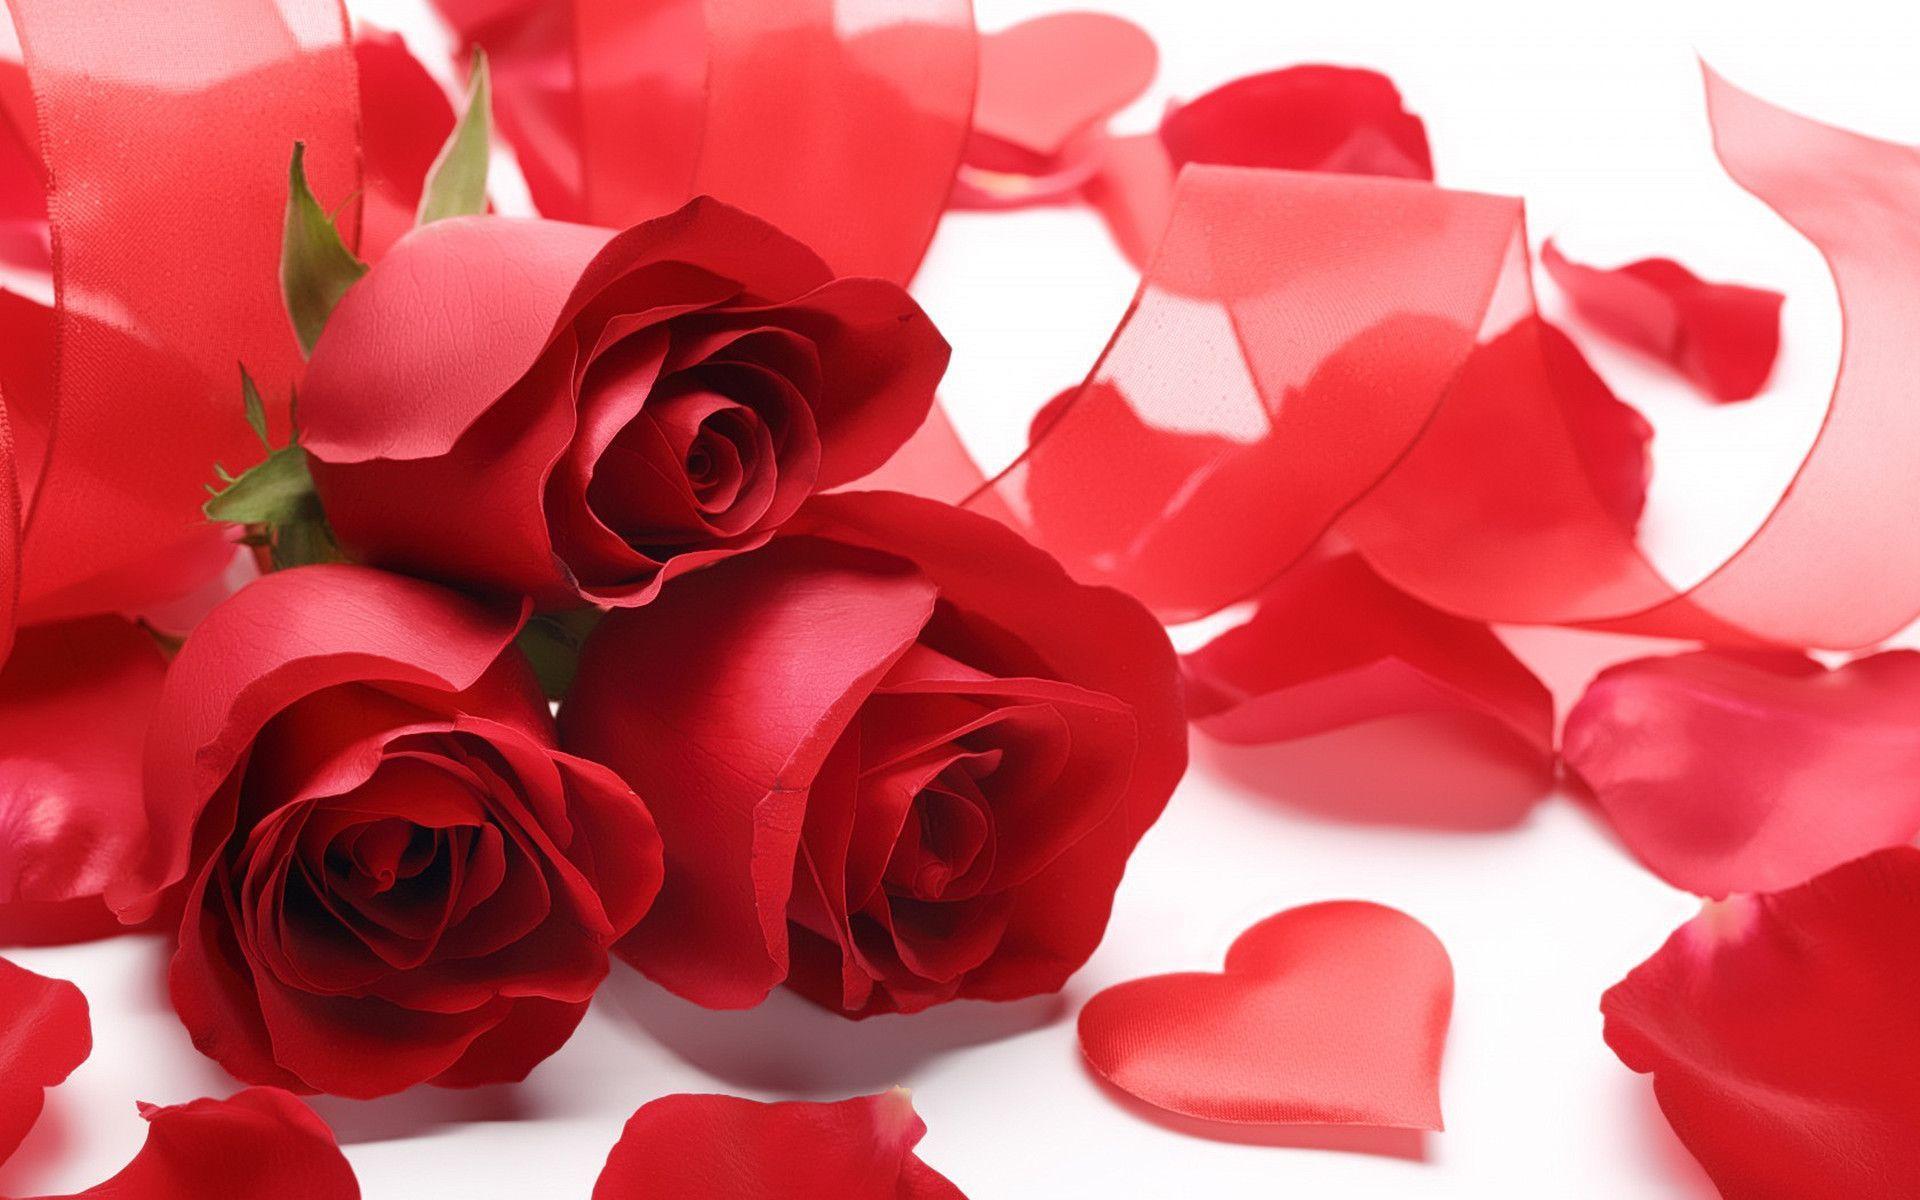 Wallpaper For > Wallpaper Of Red Roses With Heart